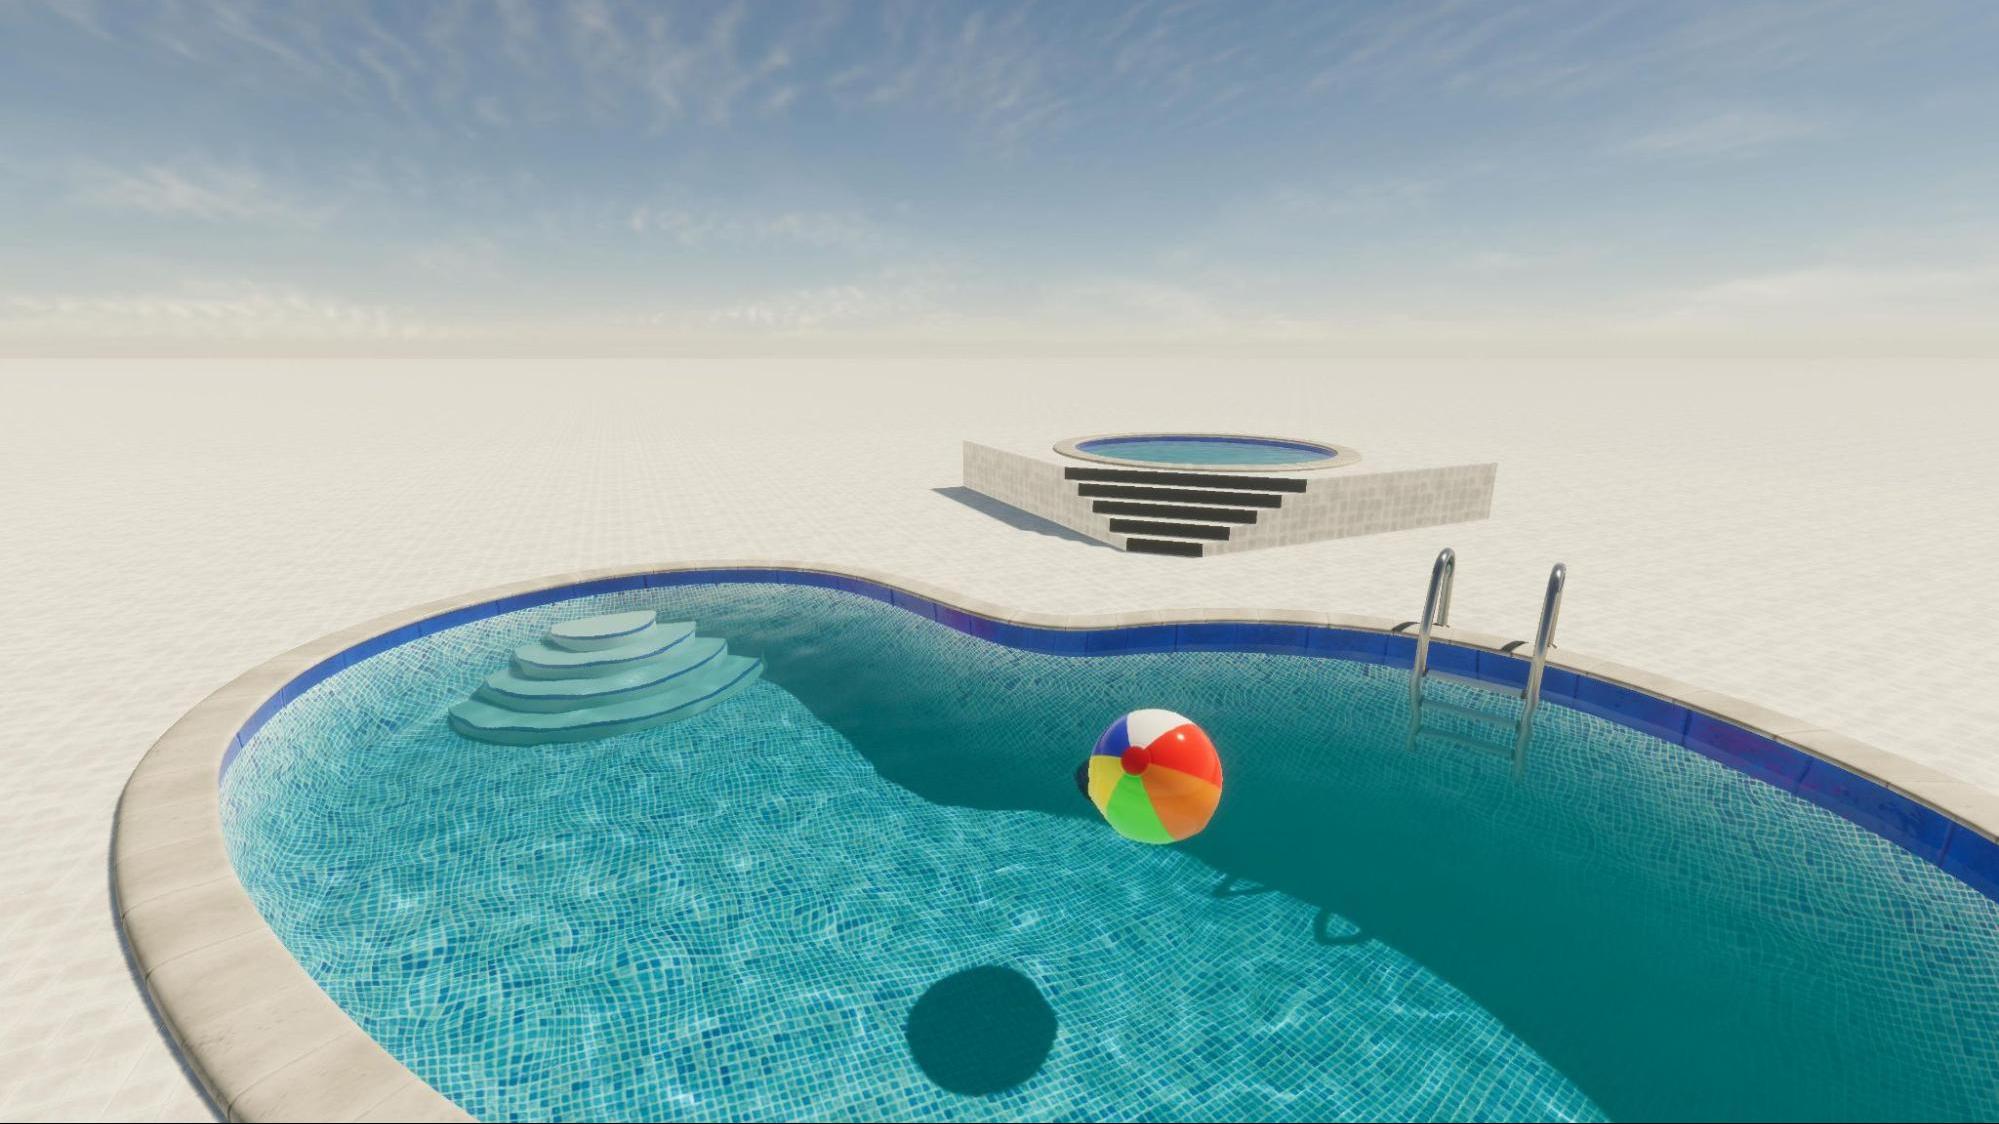 Unity_High Definition Render Pipeline_water system_swimming pool